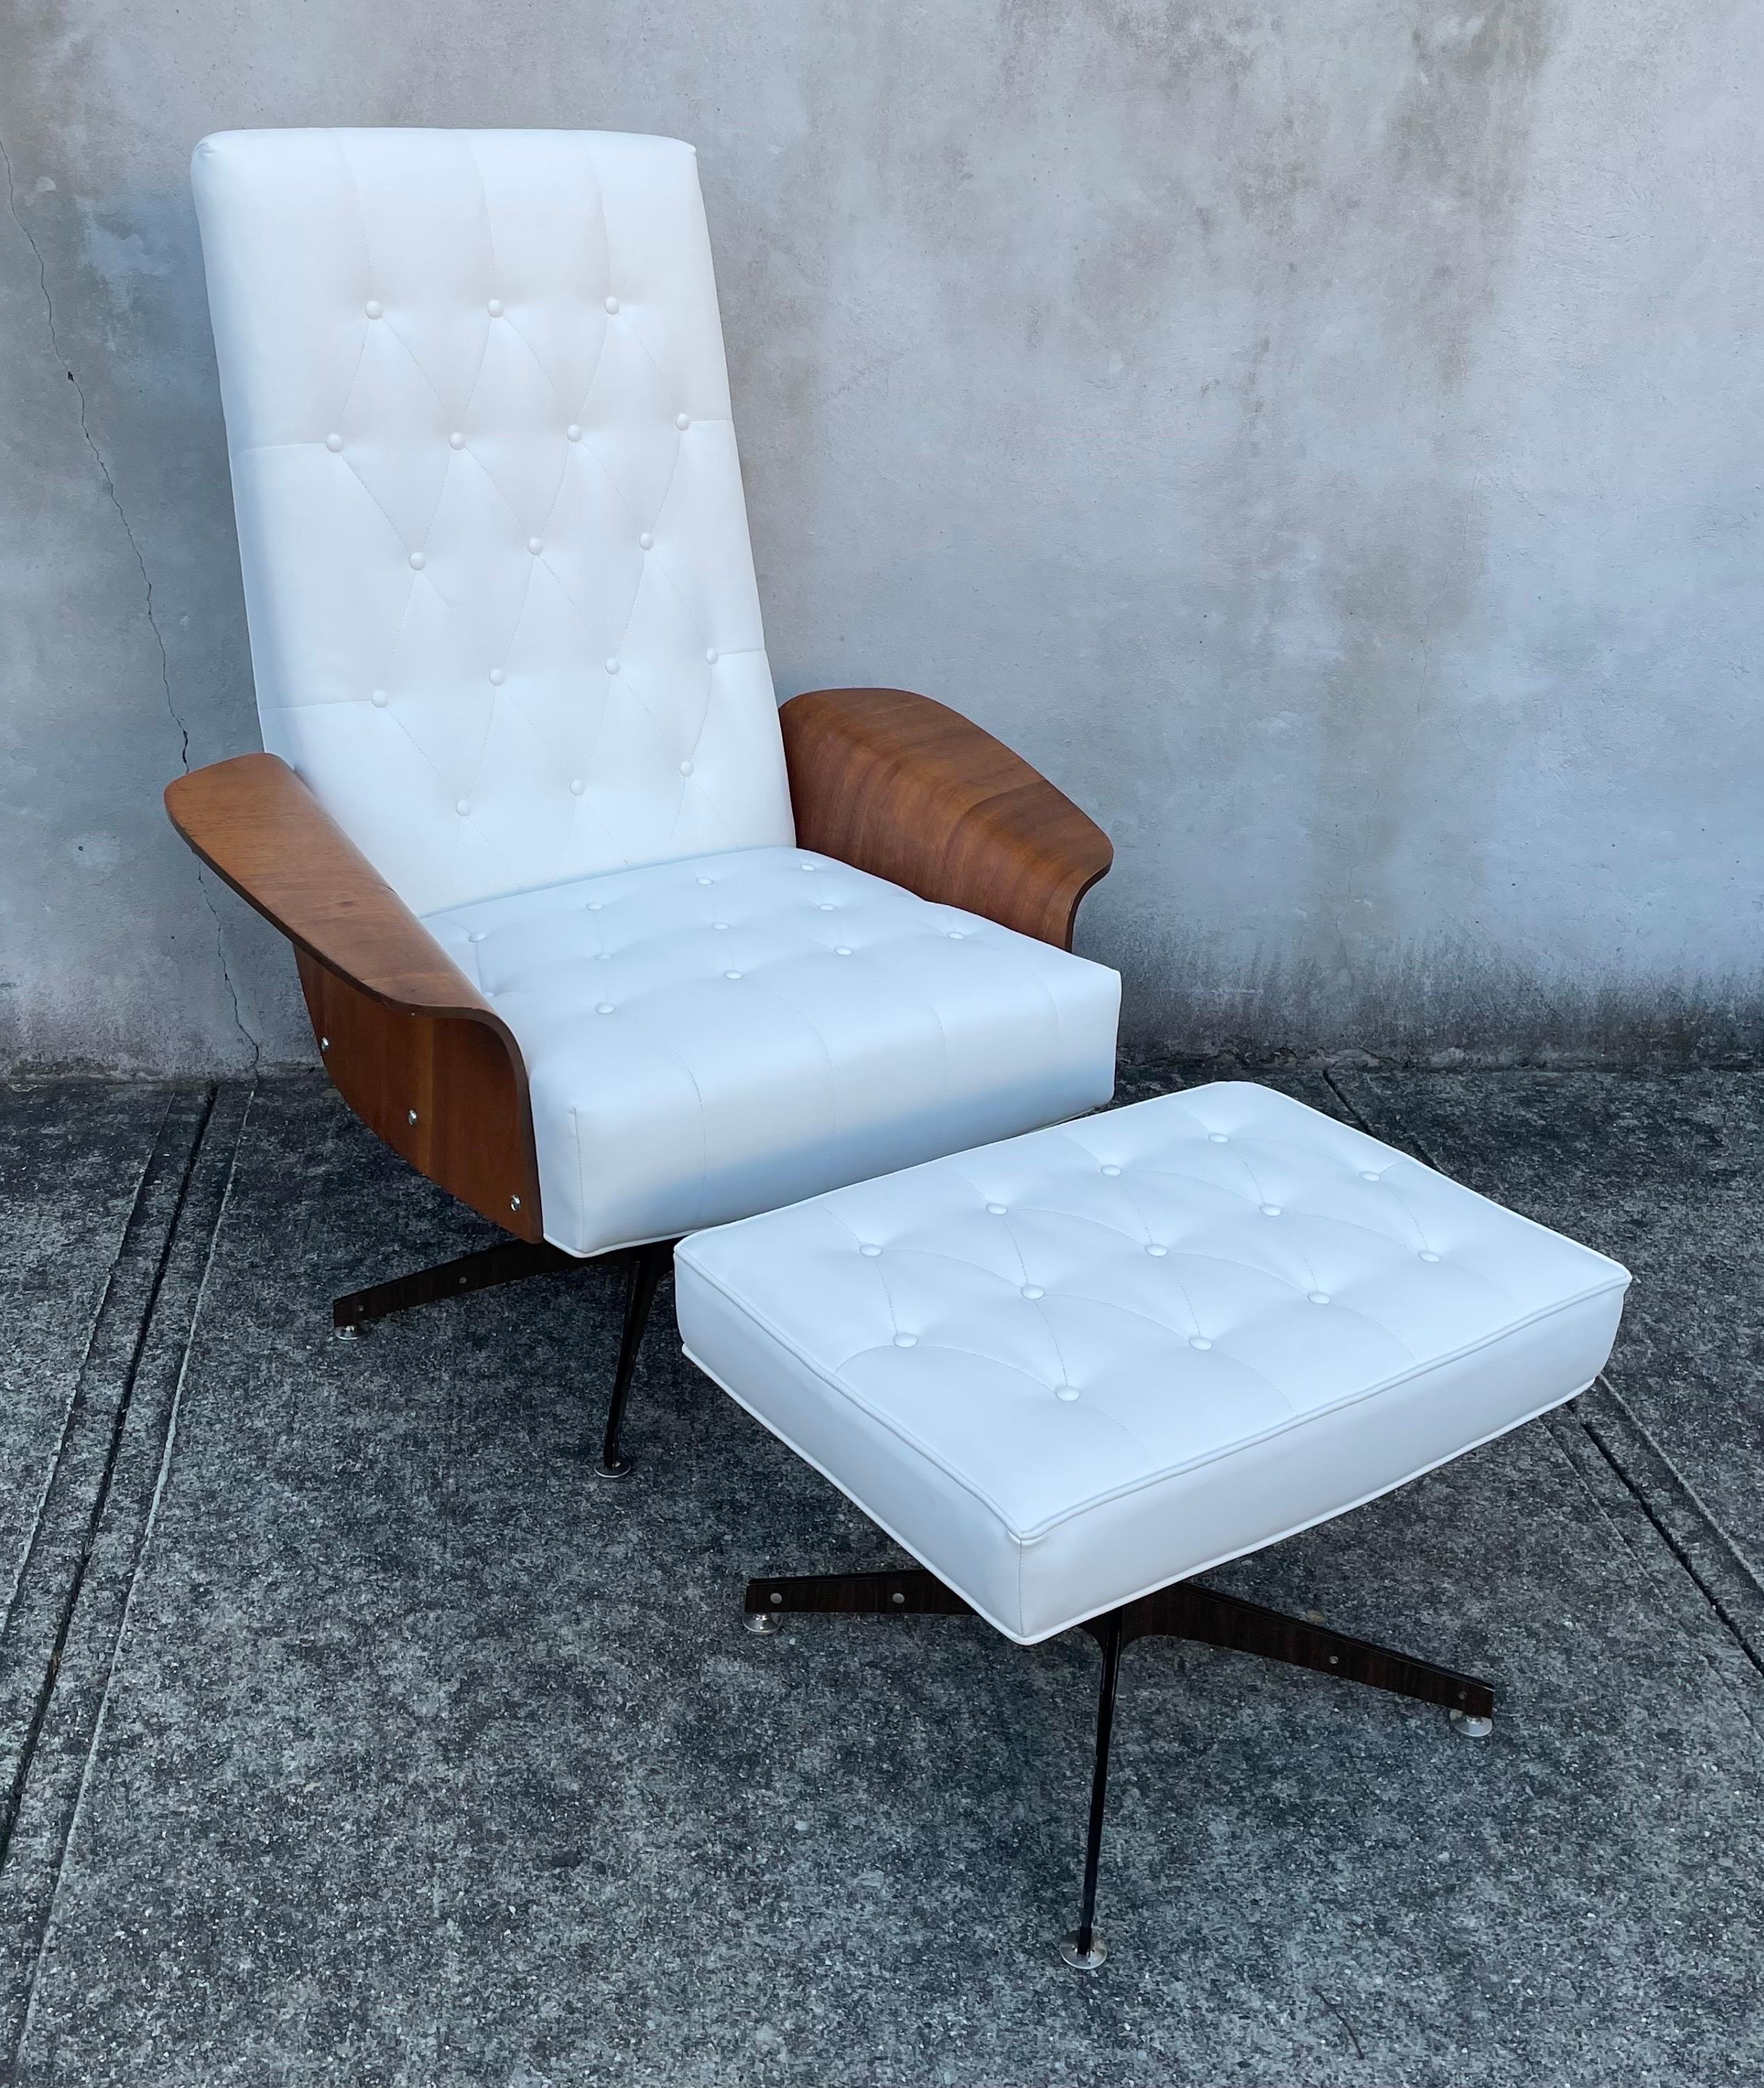 Beautiful Mid Century Modern George Mulhauser lounge chair and ottoman for Plycraft.  Reupholstered in white faux leather, beautiful bentwood armrests, 1960's.  Ottoman dimensions 24 x 17 x 16 tall.